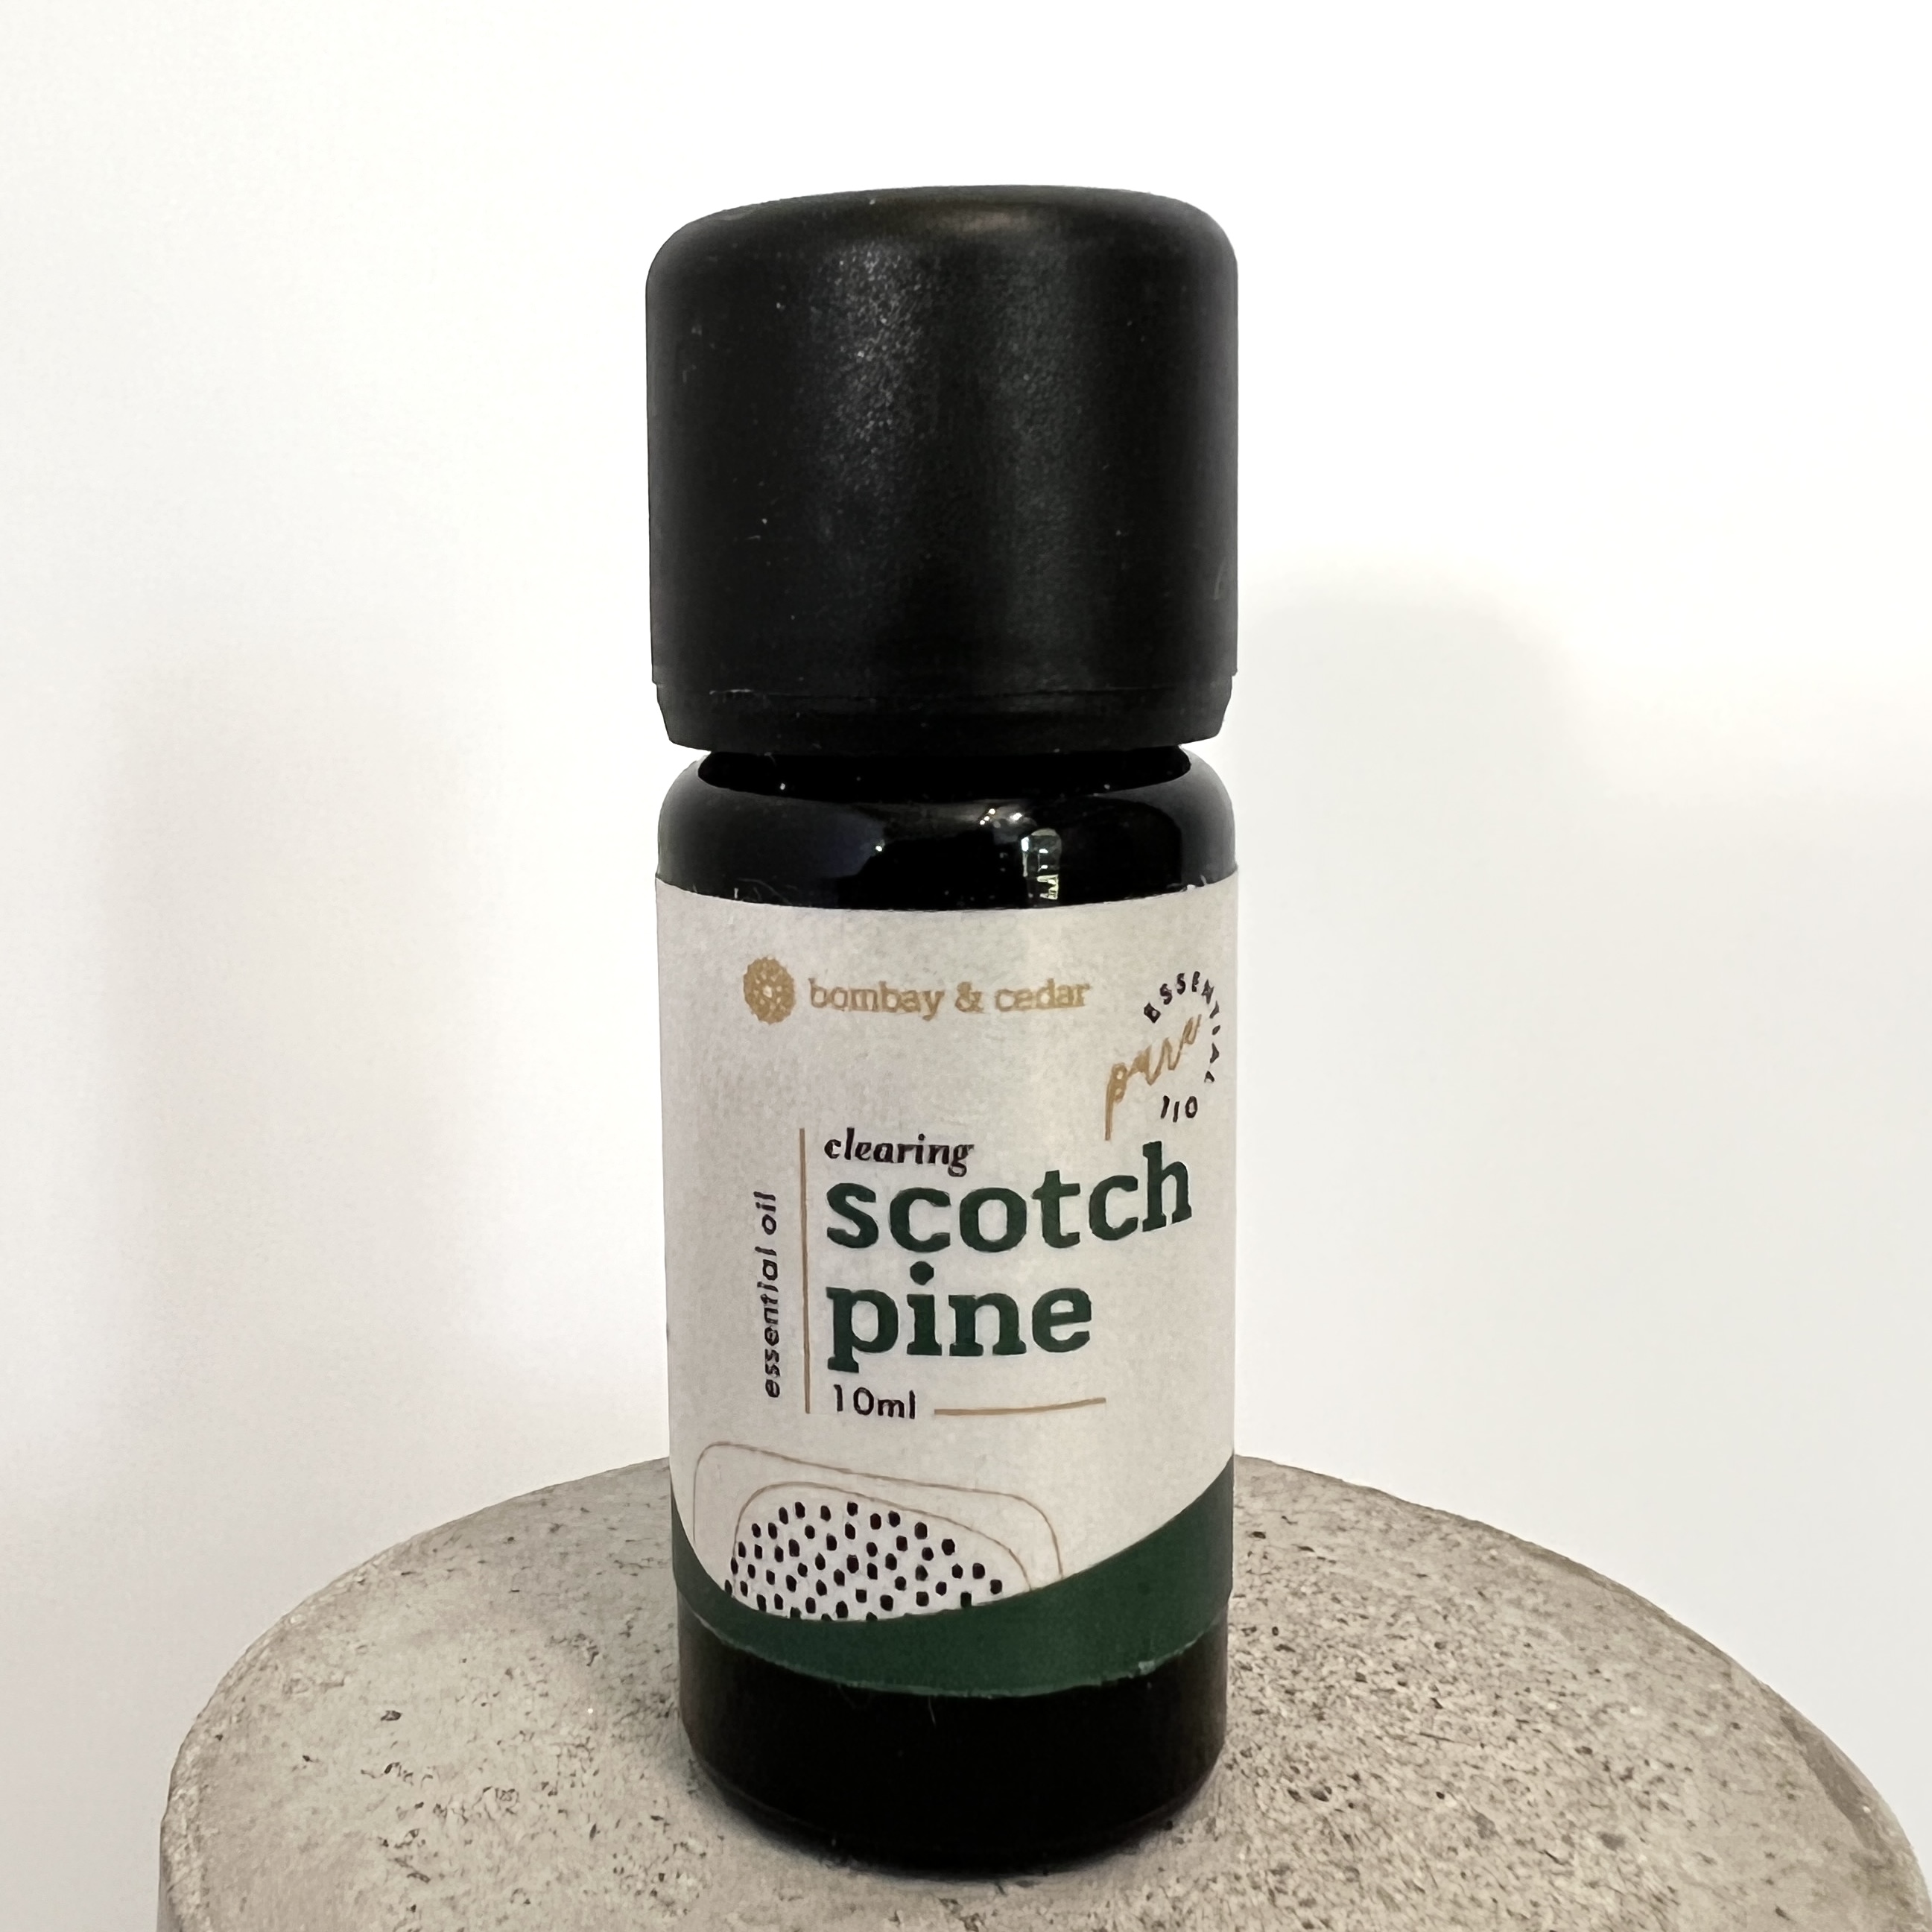 Scotch Pine Essential Oil for Bombay and Cedar Lifestyle Box January 2022